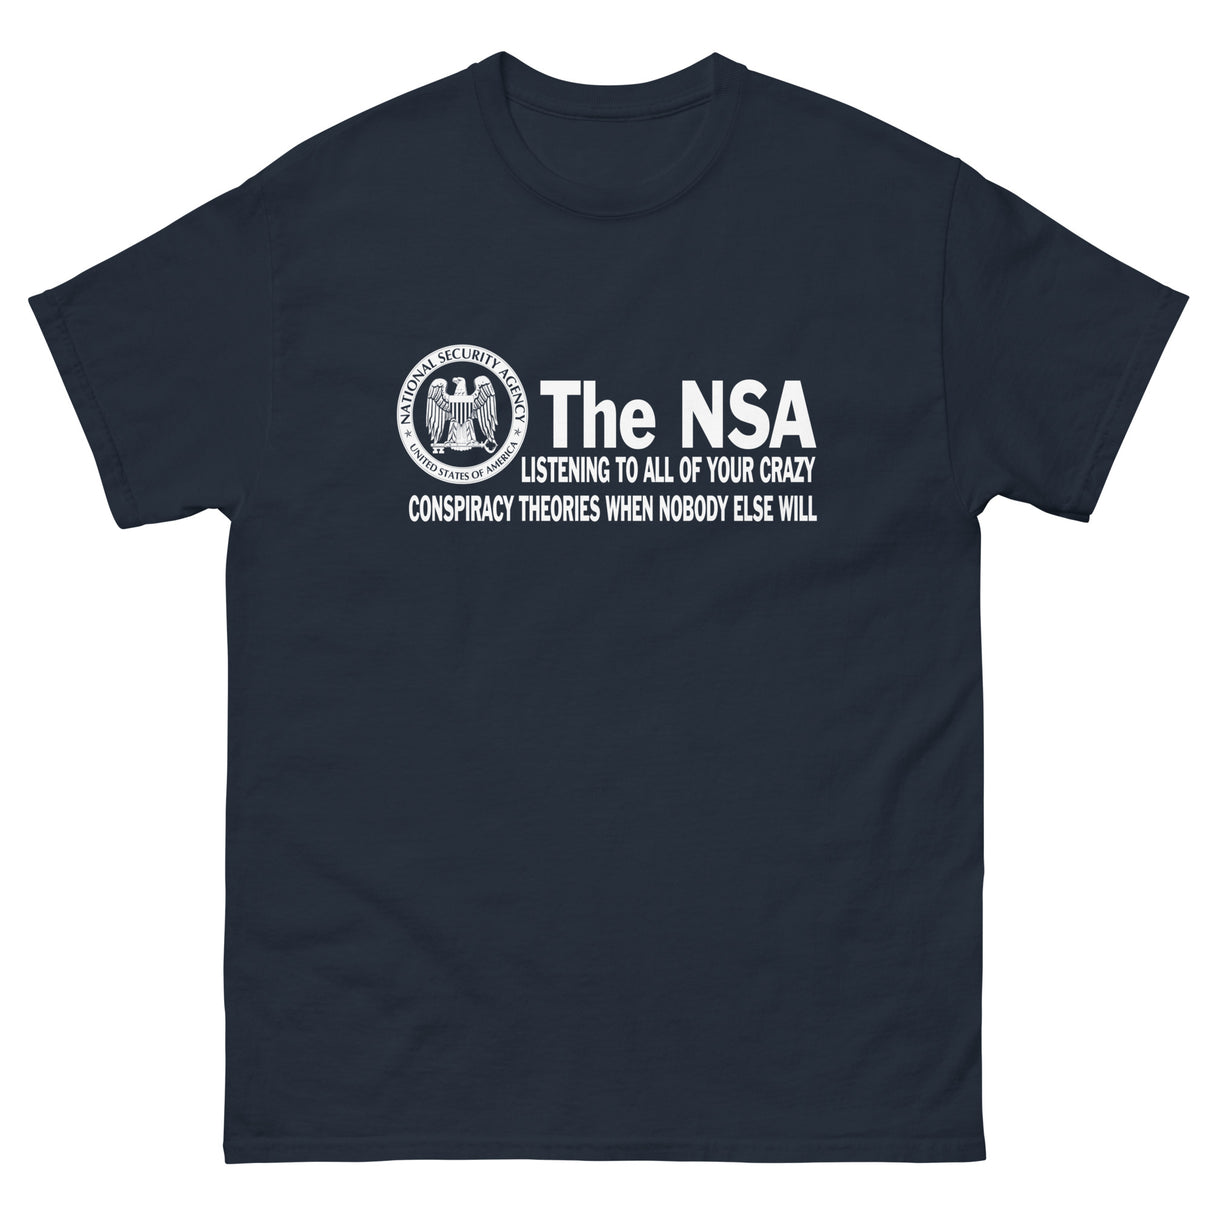 The NSA Conspiracy Theories Heavy Cotton Shirt